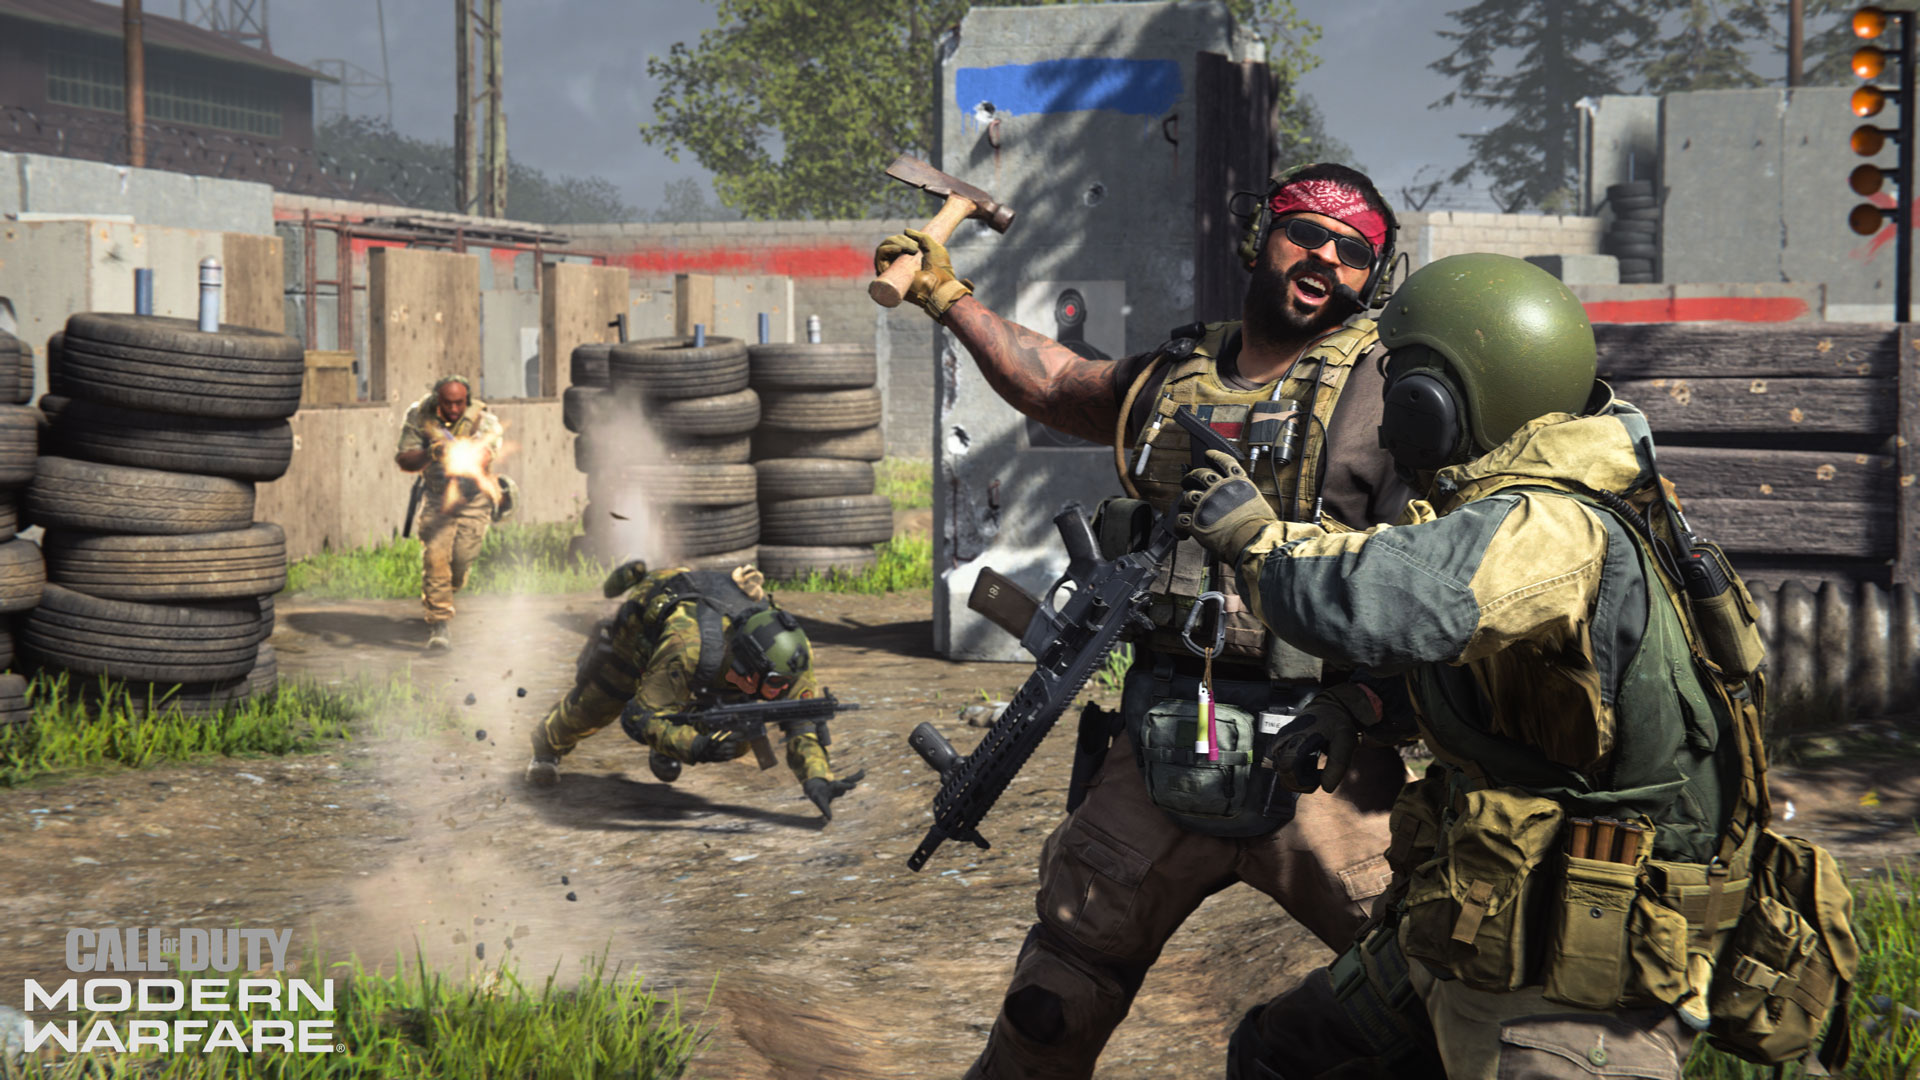 How To Join 'Call of Duty: Modern Warfare' 2v2 Alpha: Dates, Preload Time and Maps for PS4 Test